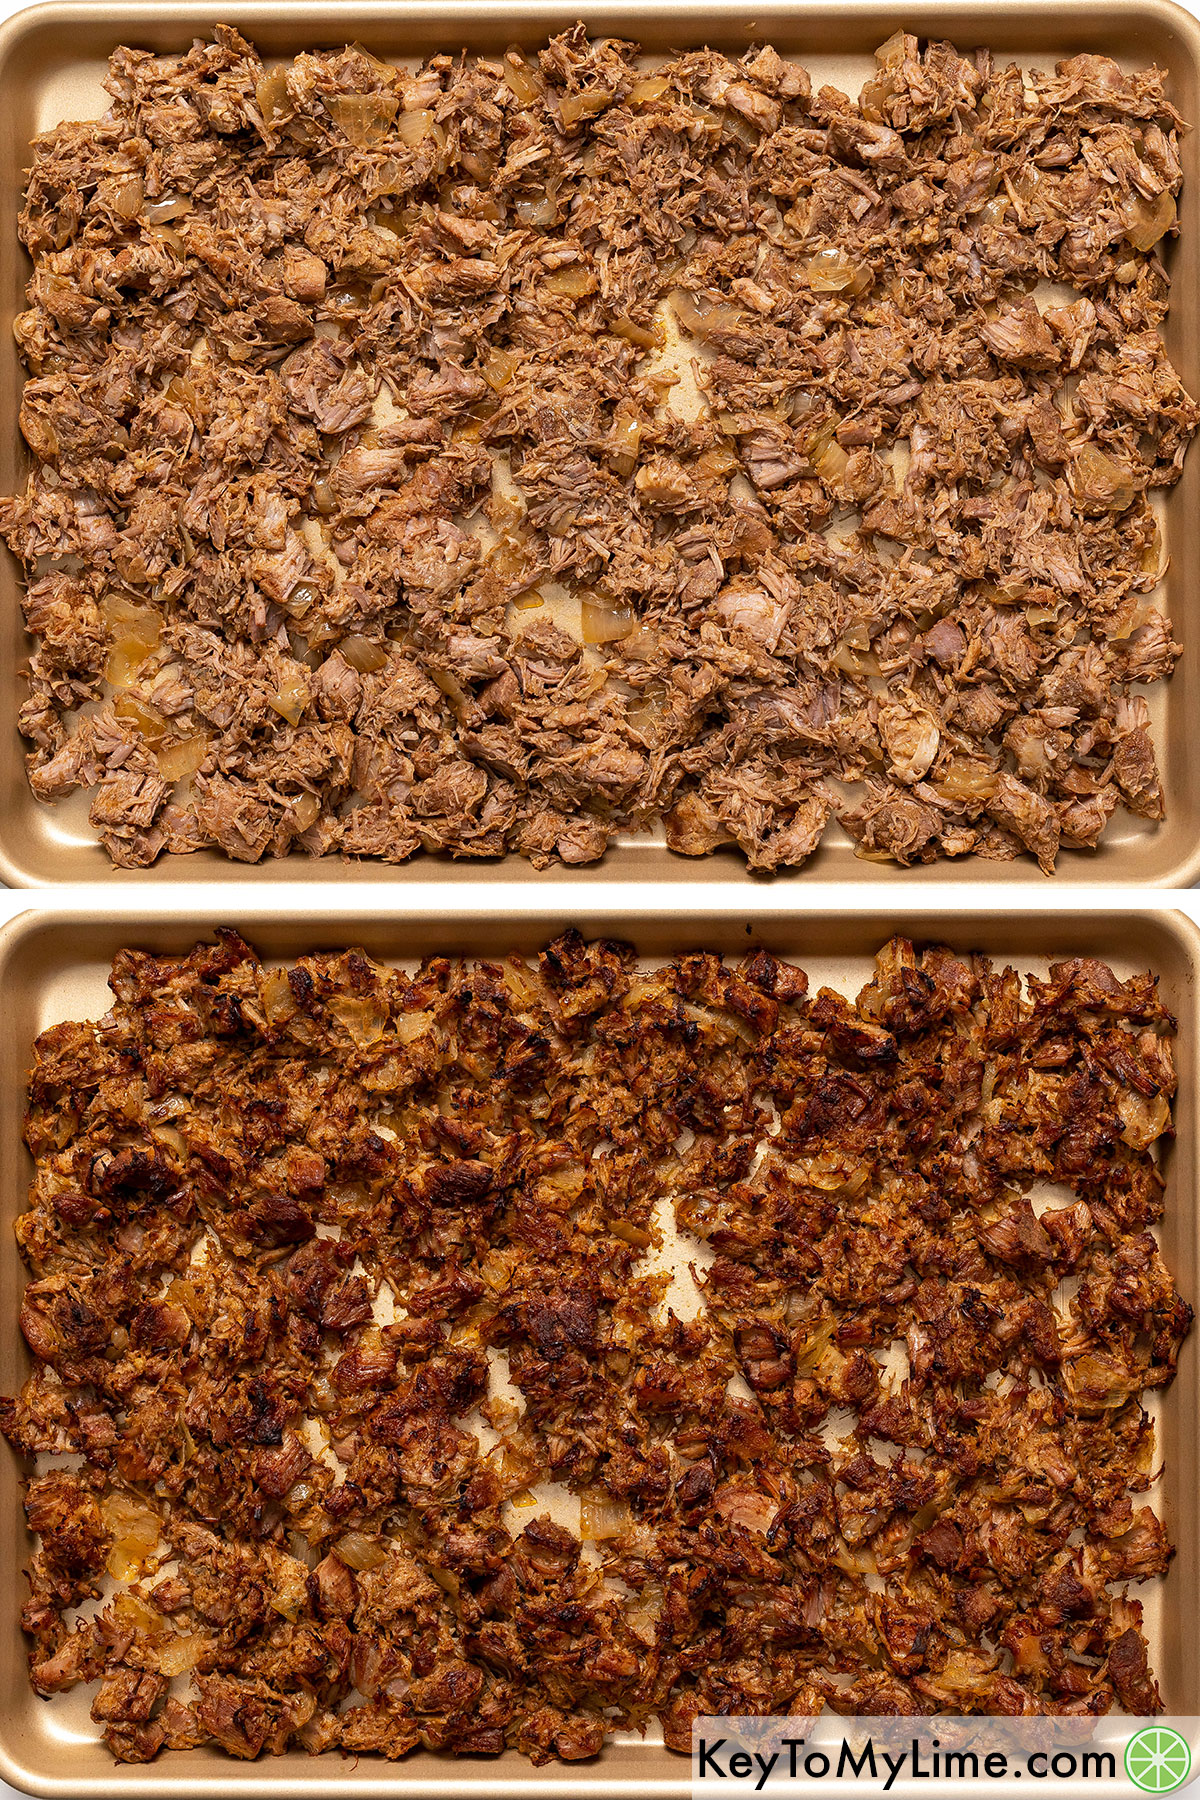 Shredded carnitas on a baking sheet shown before and after broiling to make it crispy.